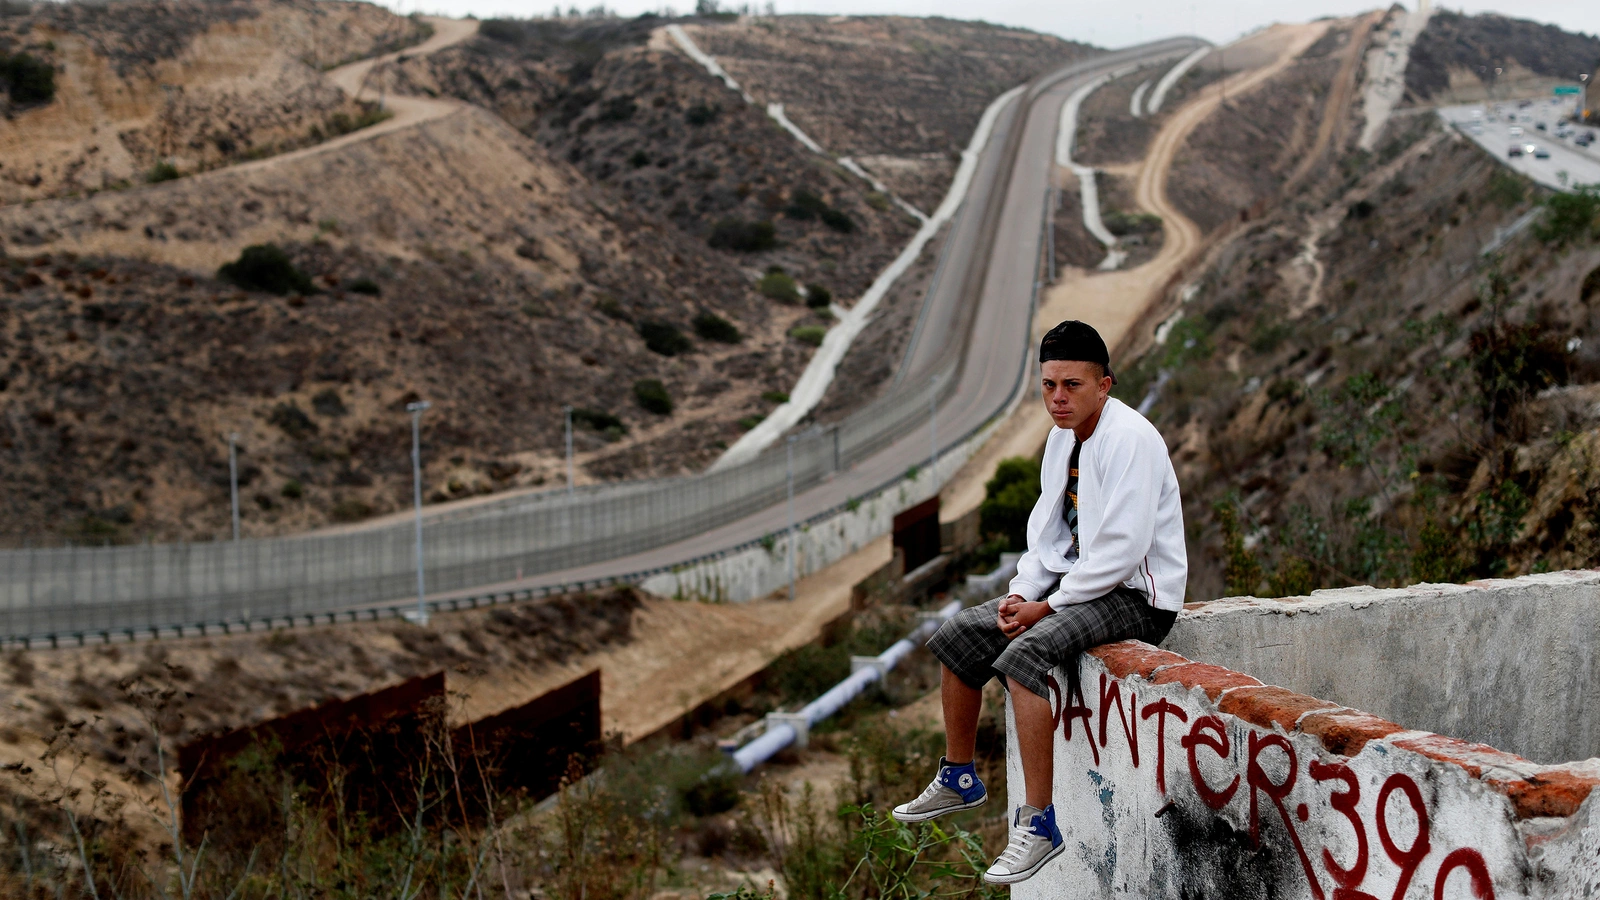 Gerson Antonio Zaldivar, a migrant from Honduras, poses in front of the border wall between the U.S. and Mexico.